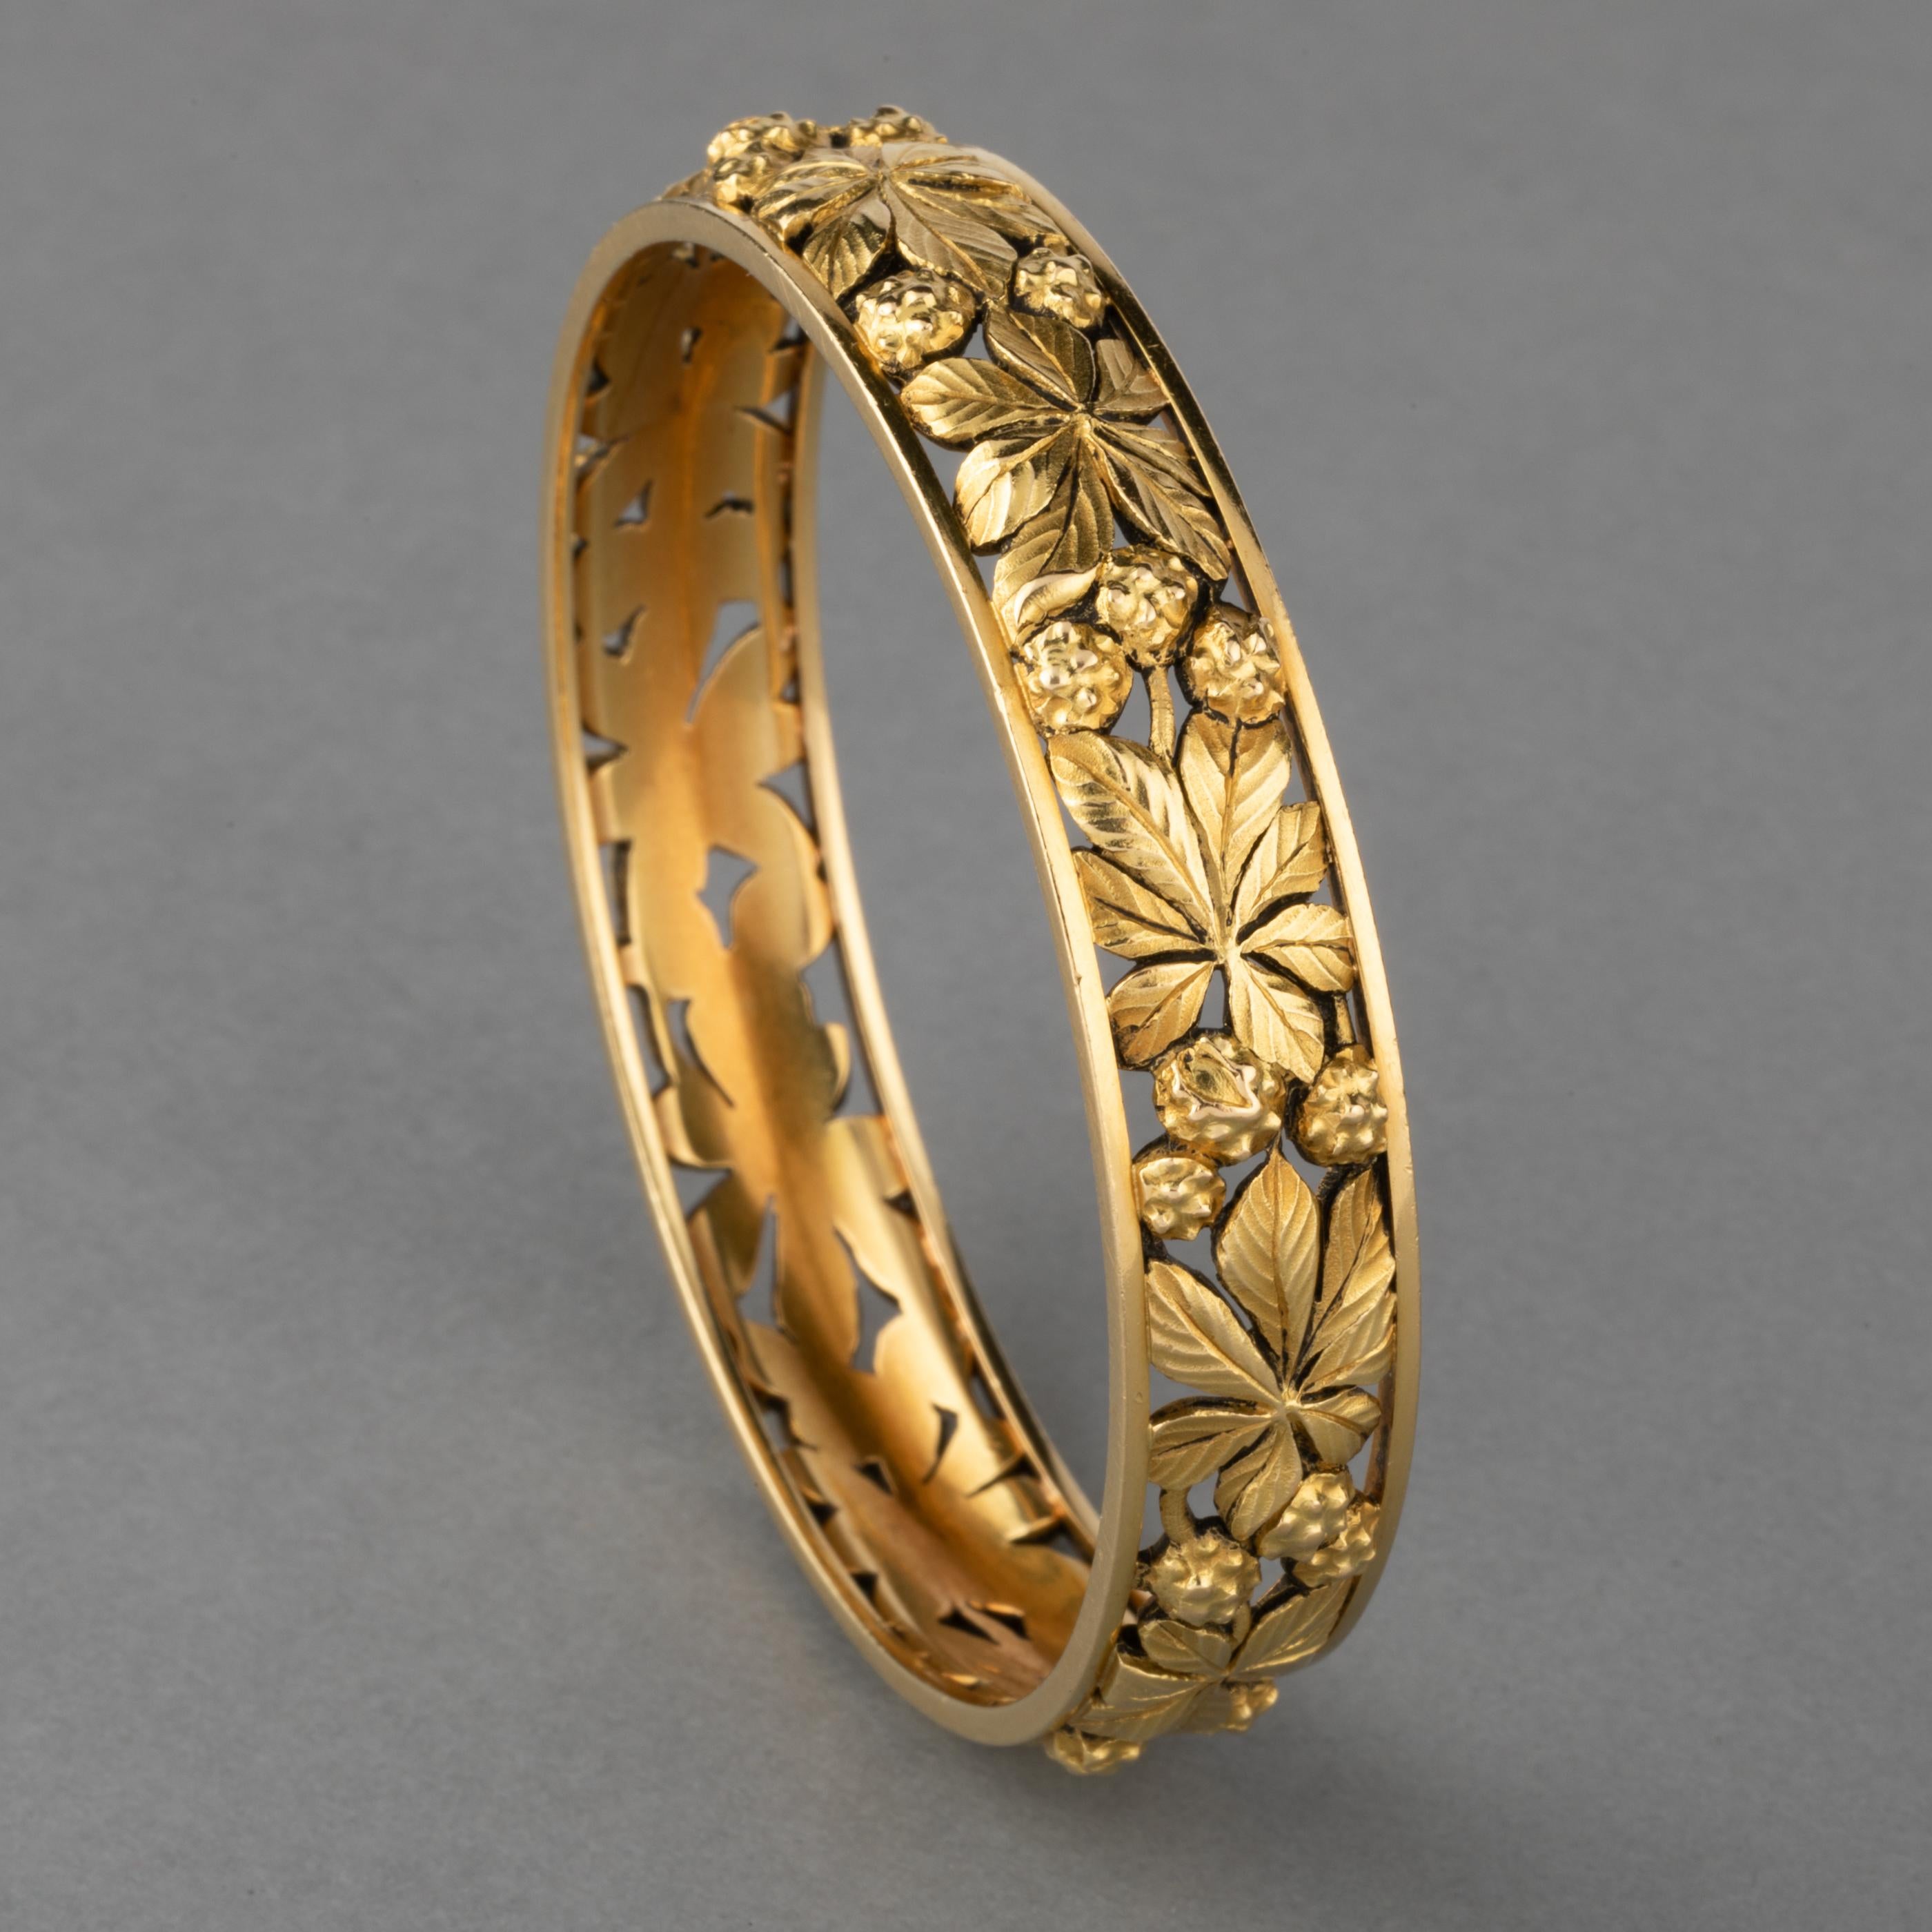 French Antique Gold Bangle Bracelet In Good Condition For Sale In Saint-Ouen, FR